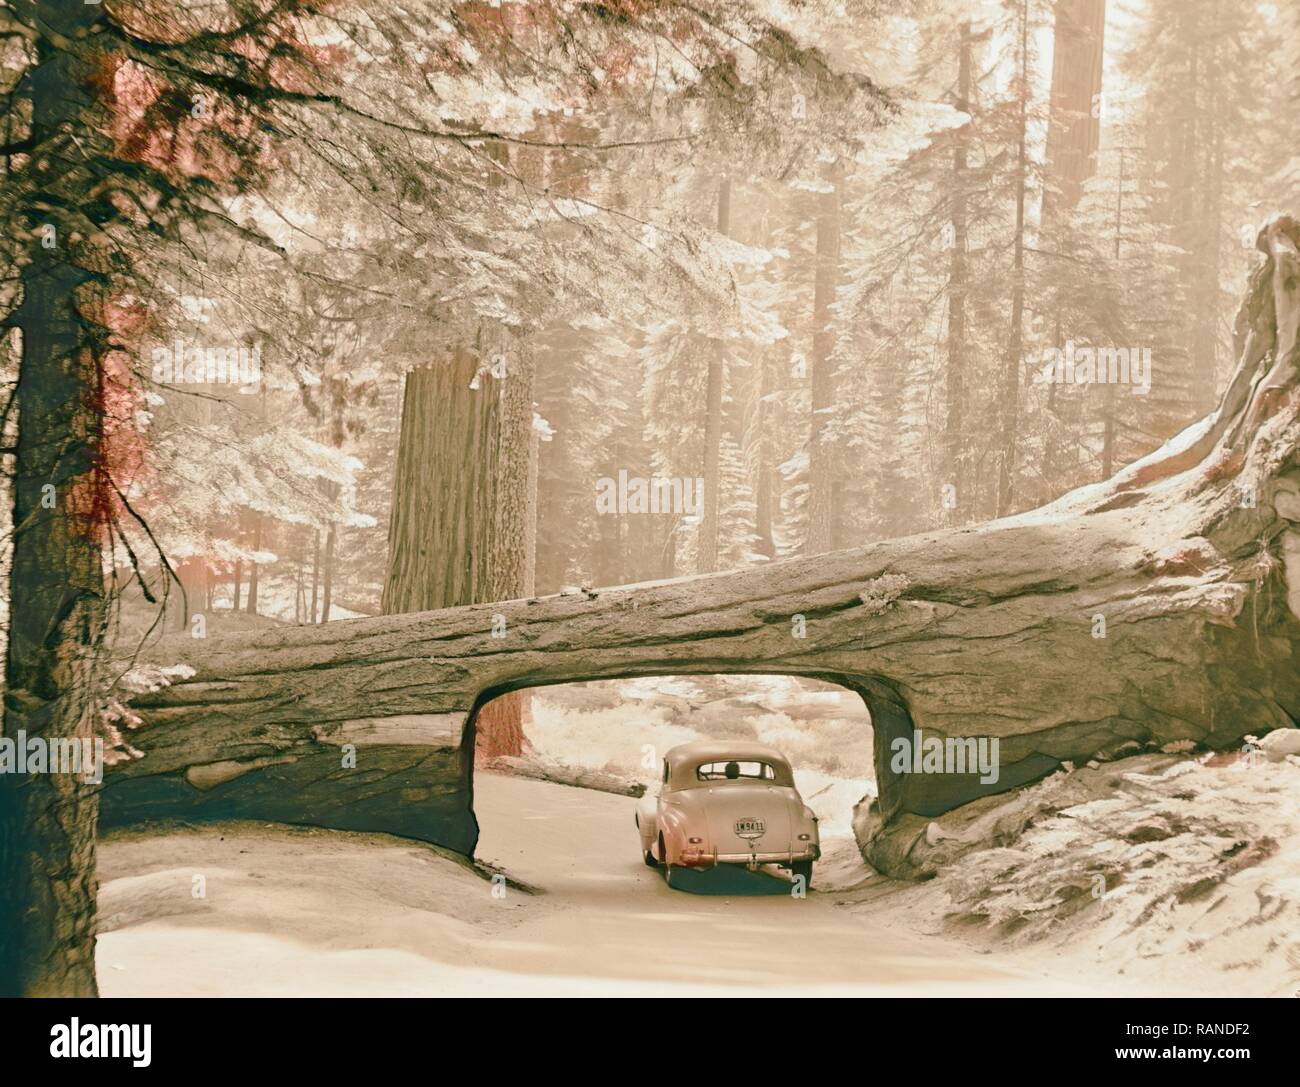 Sequoia National Park, Sept. 1957 The tunnel log. Car driving through passage way cut through side of log. 1957 reimagined Stock Photo